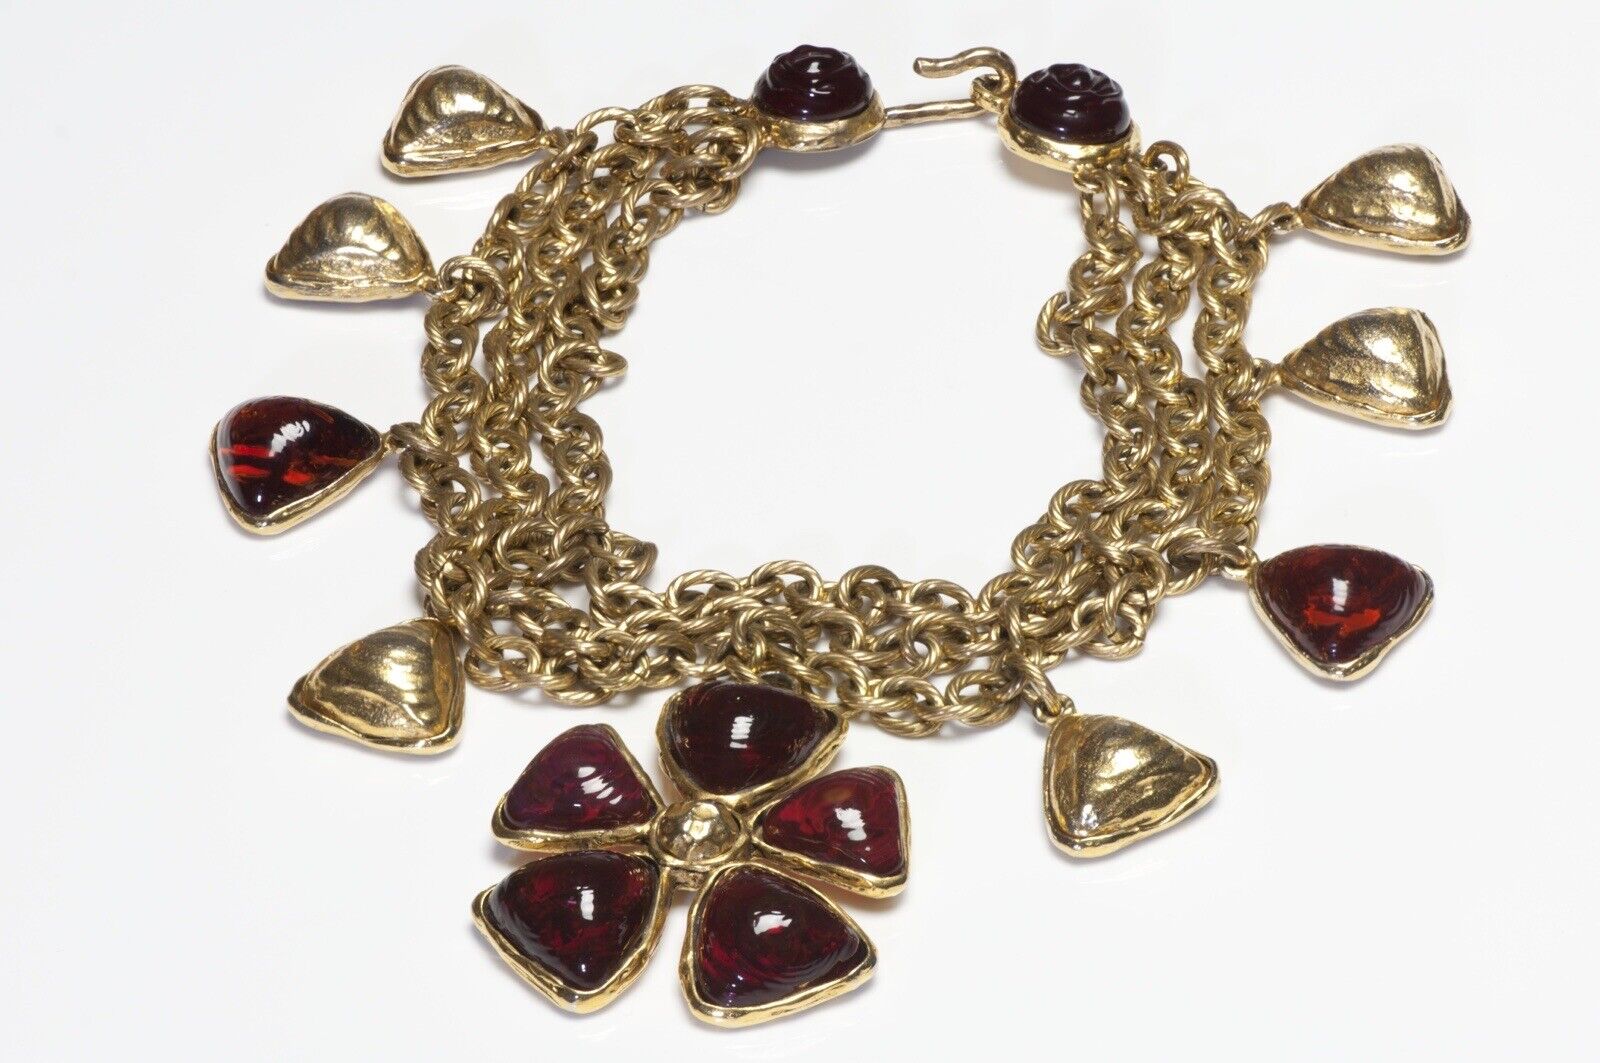 Chanel 1980’s Maison Gripoix Red Glass Camellia Flower Charm Chain Necklace - DSF Antique Jewelry